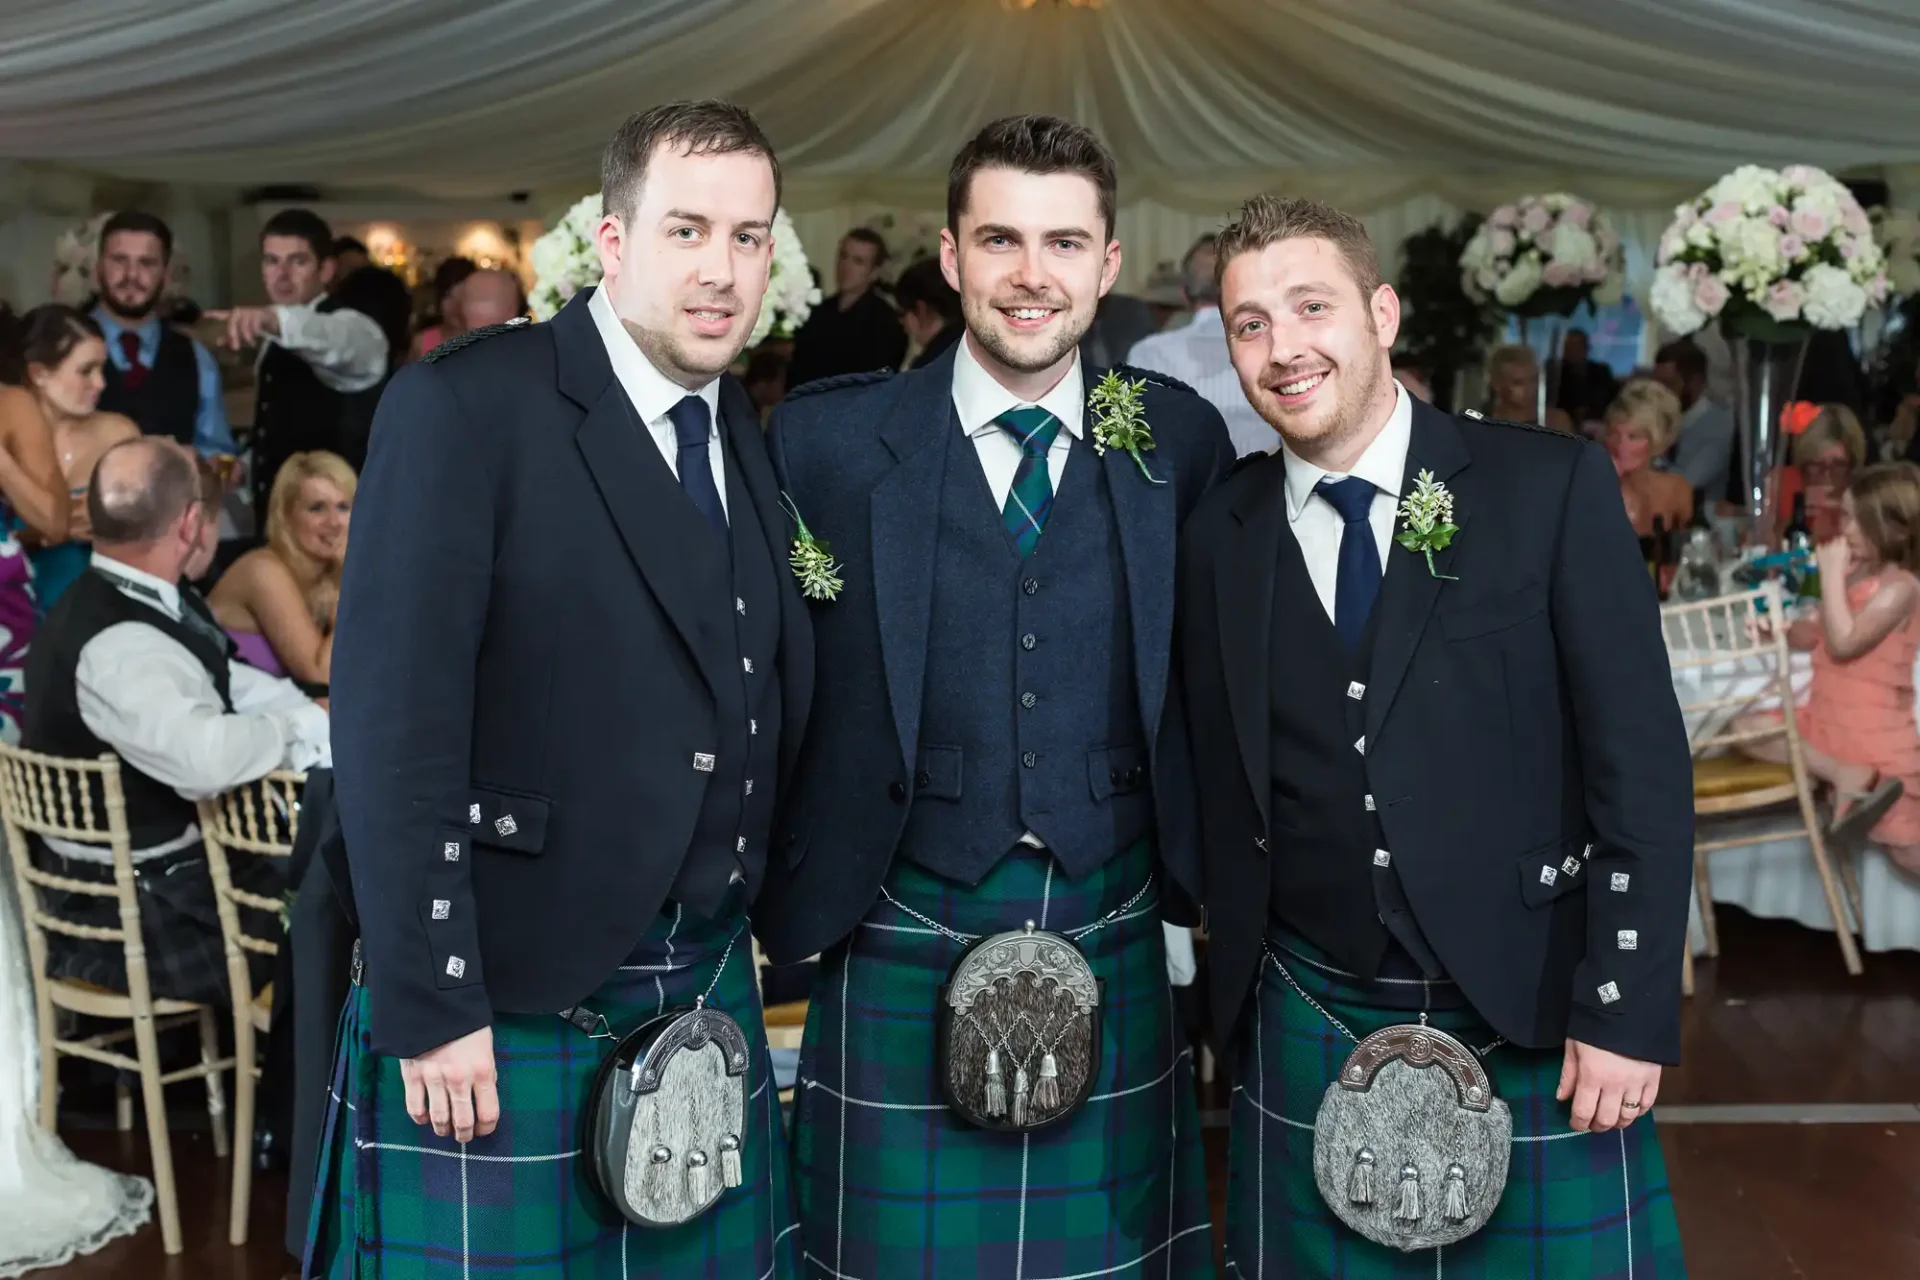 Three men in traditional scottish kilts with sporran, smiling and posing together at a wedding reception inside a tent.